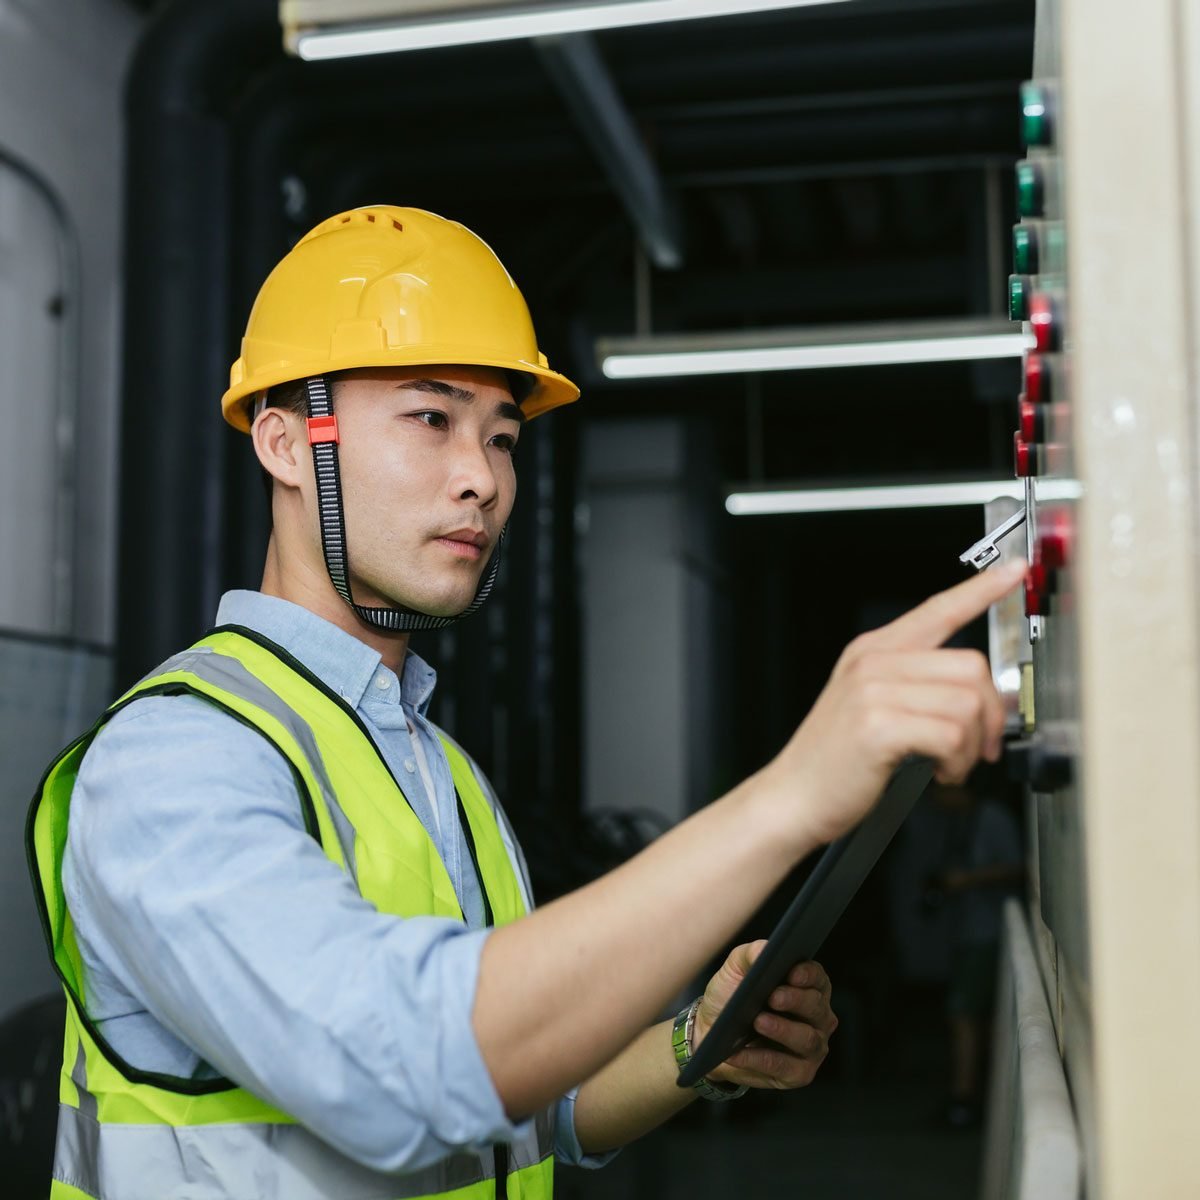 How to Find and Hire an Electrician